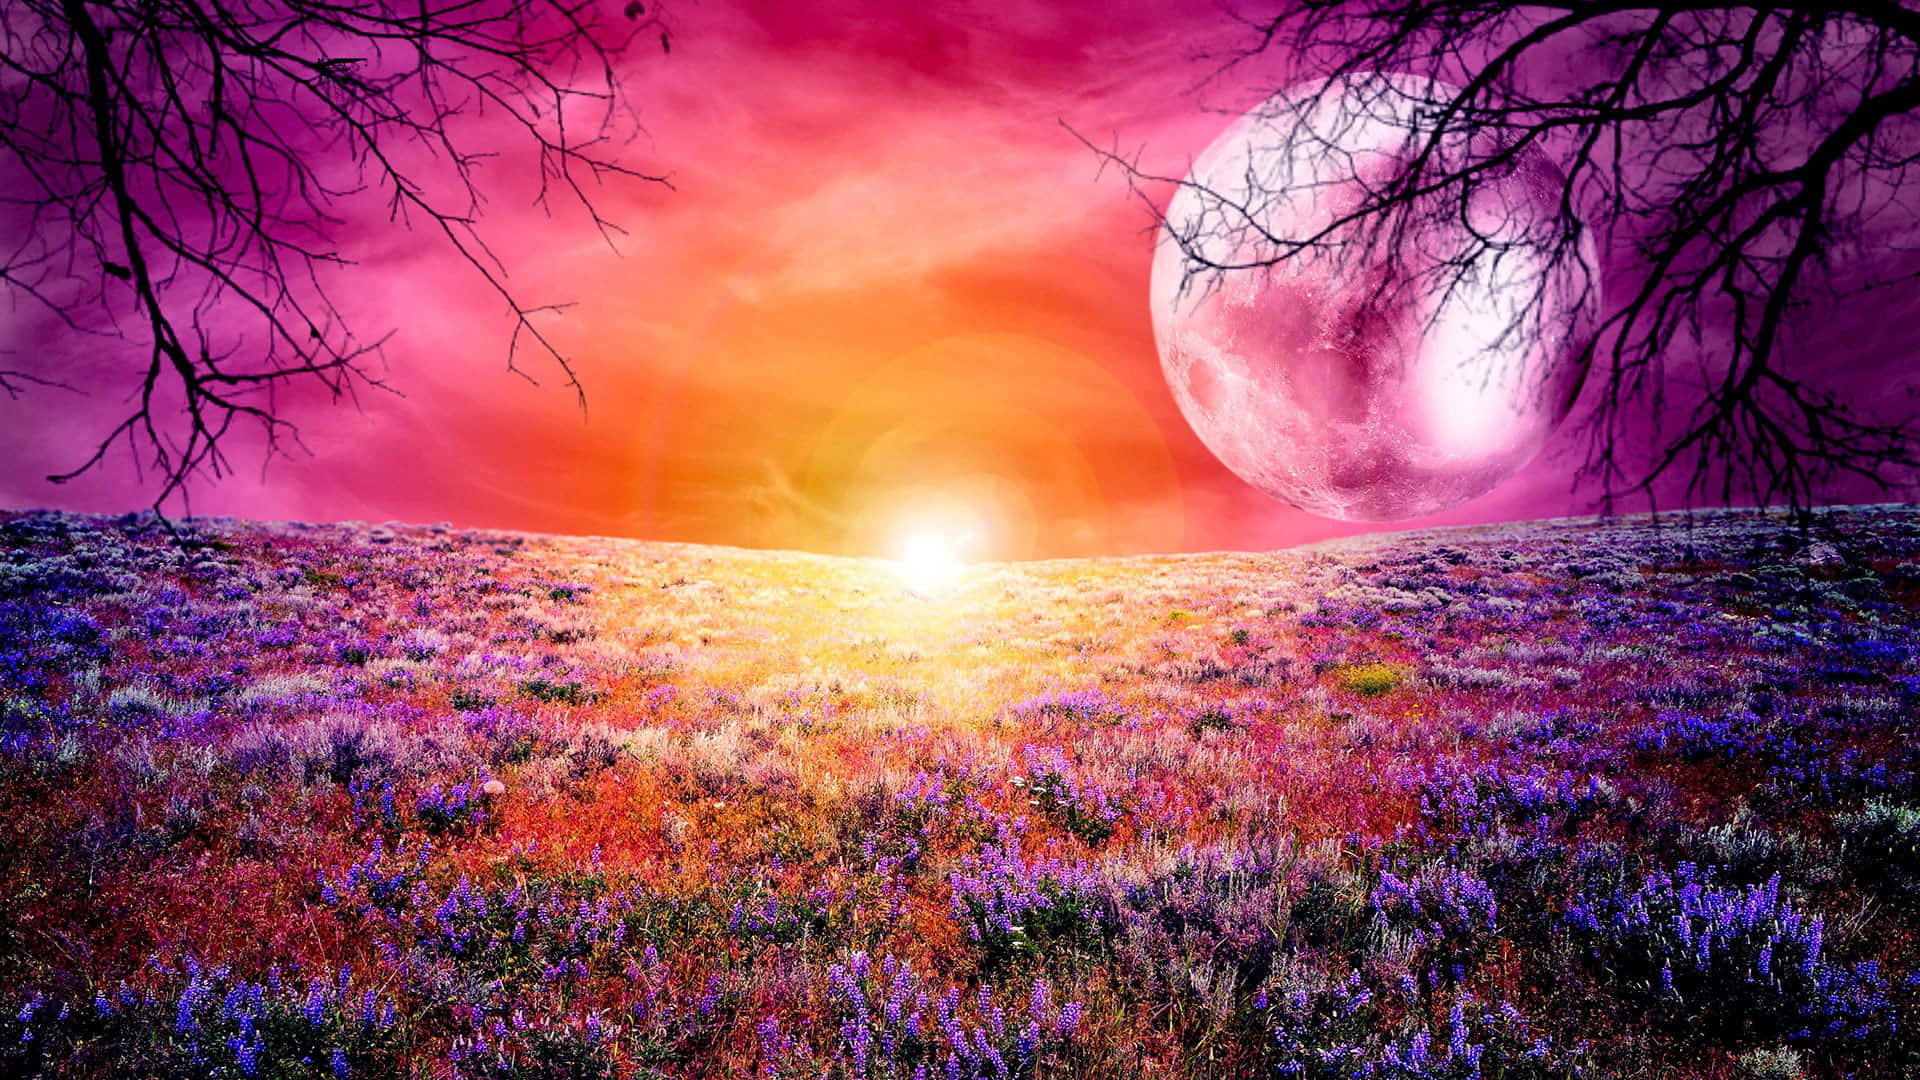 Pink Moon And Flower Field Wallpaper